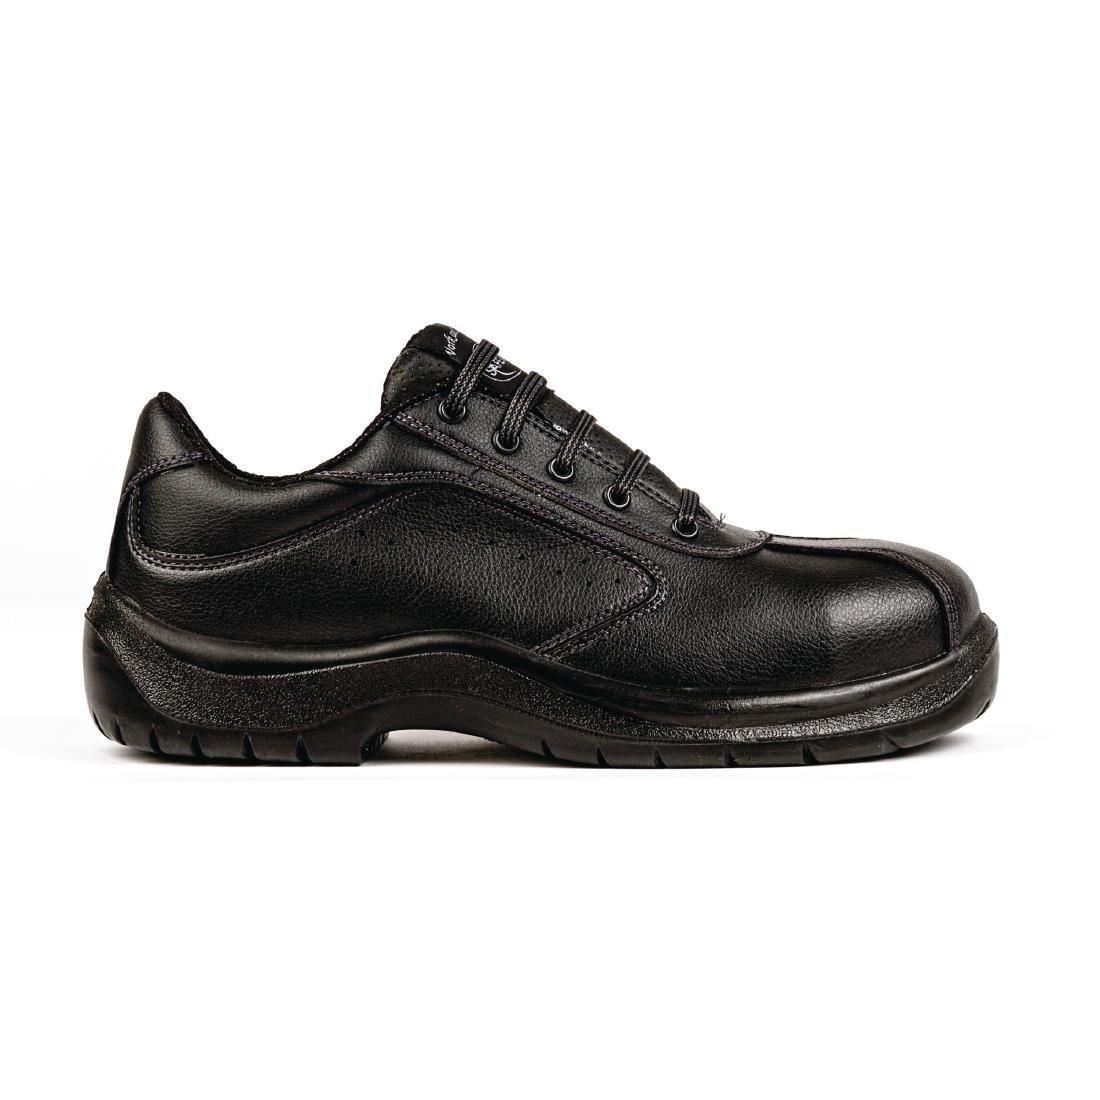 Slipbuster Side Perforated Lace Up Black 40